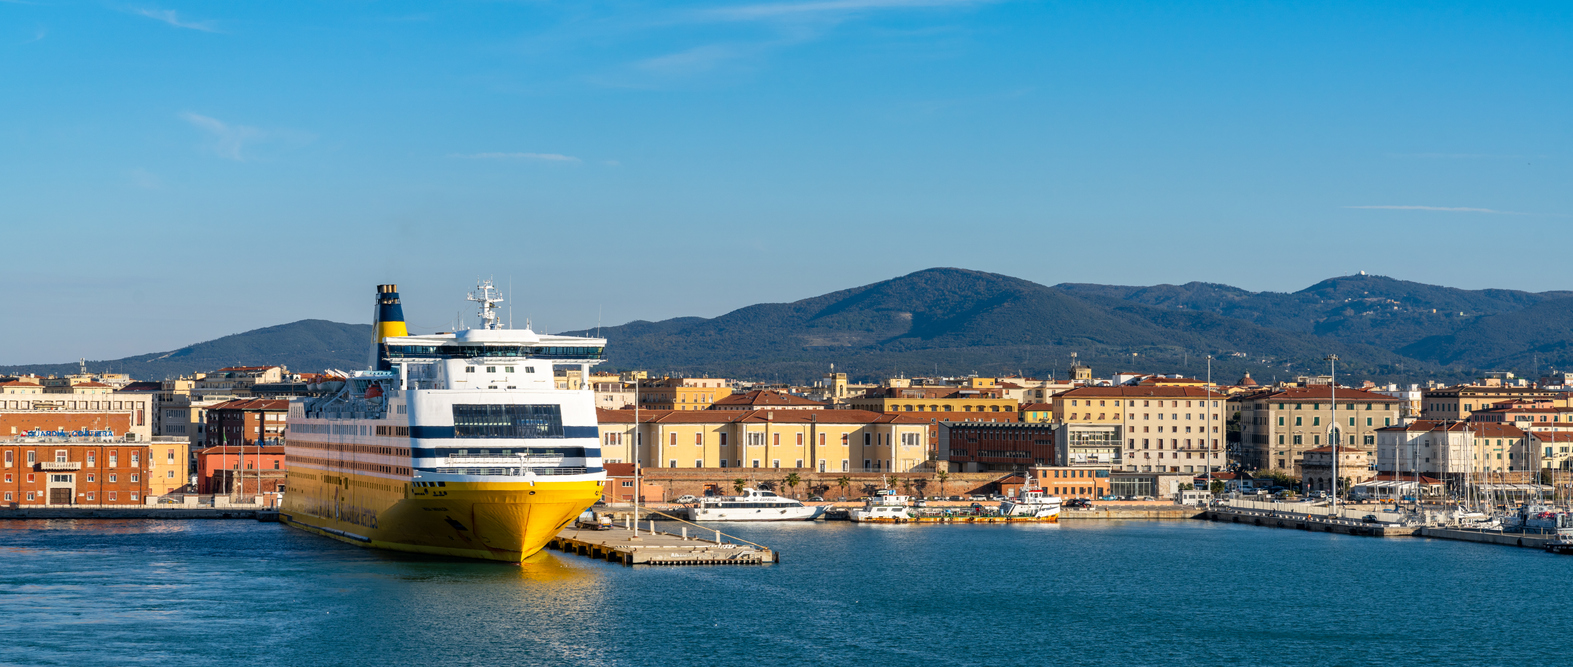 large passenger ferry in the port of Livorno with the old town and waterfront behind